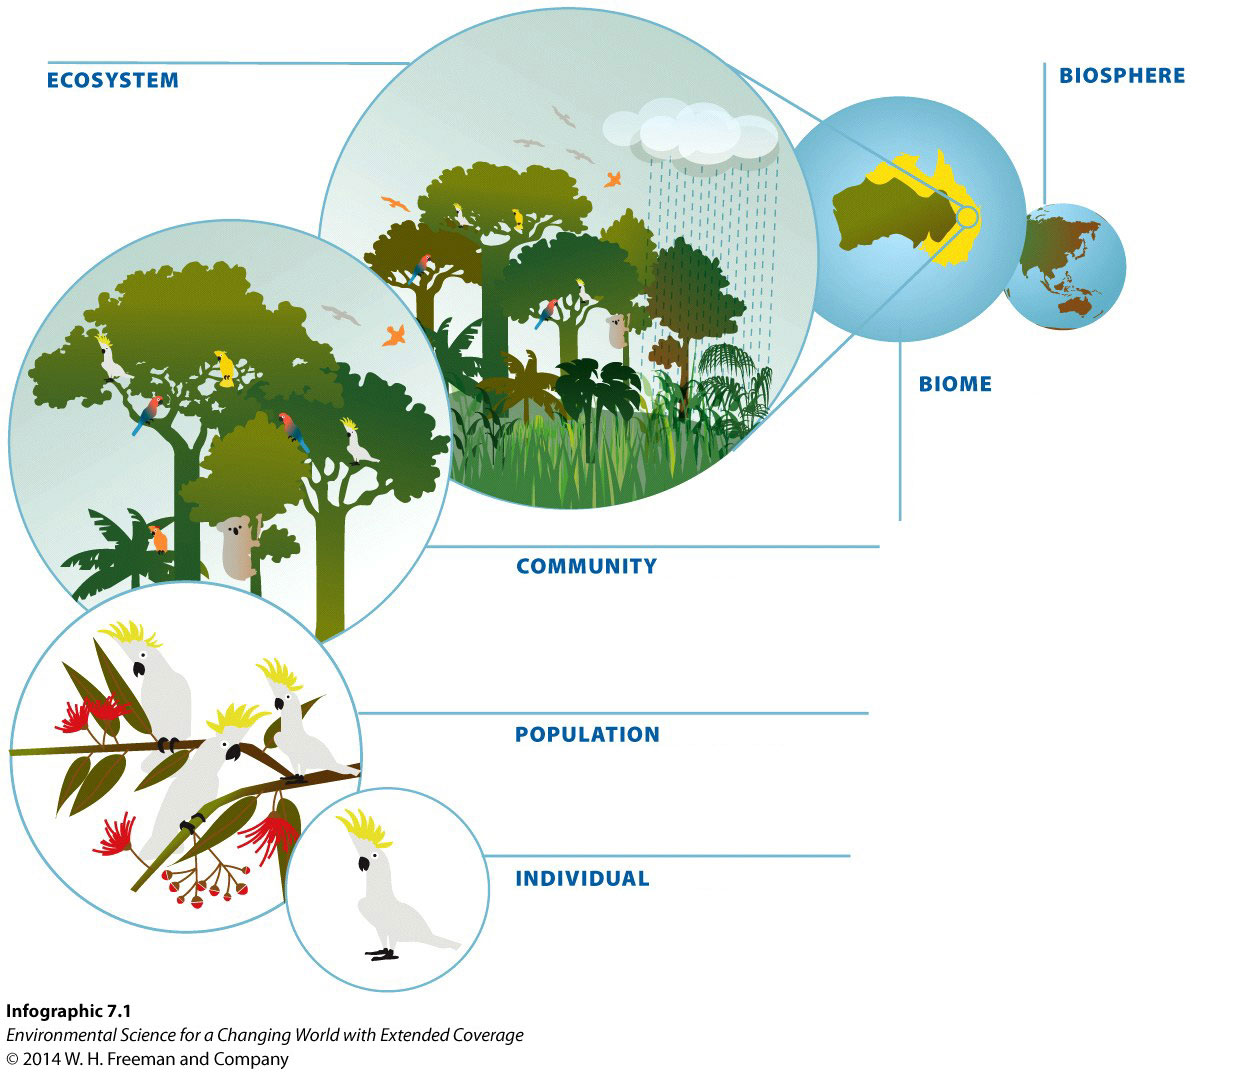 Infographic 7.1 Organization of Life: From Biosphere to Individual